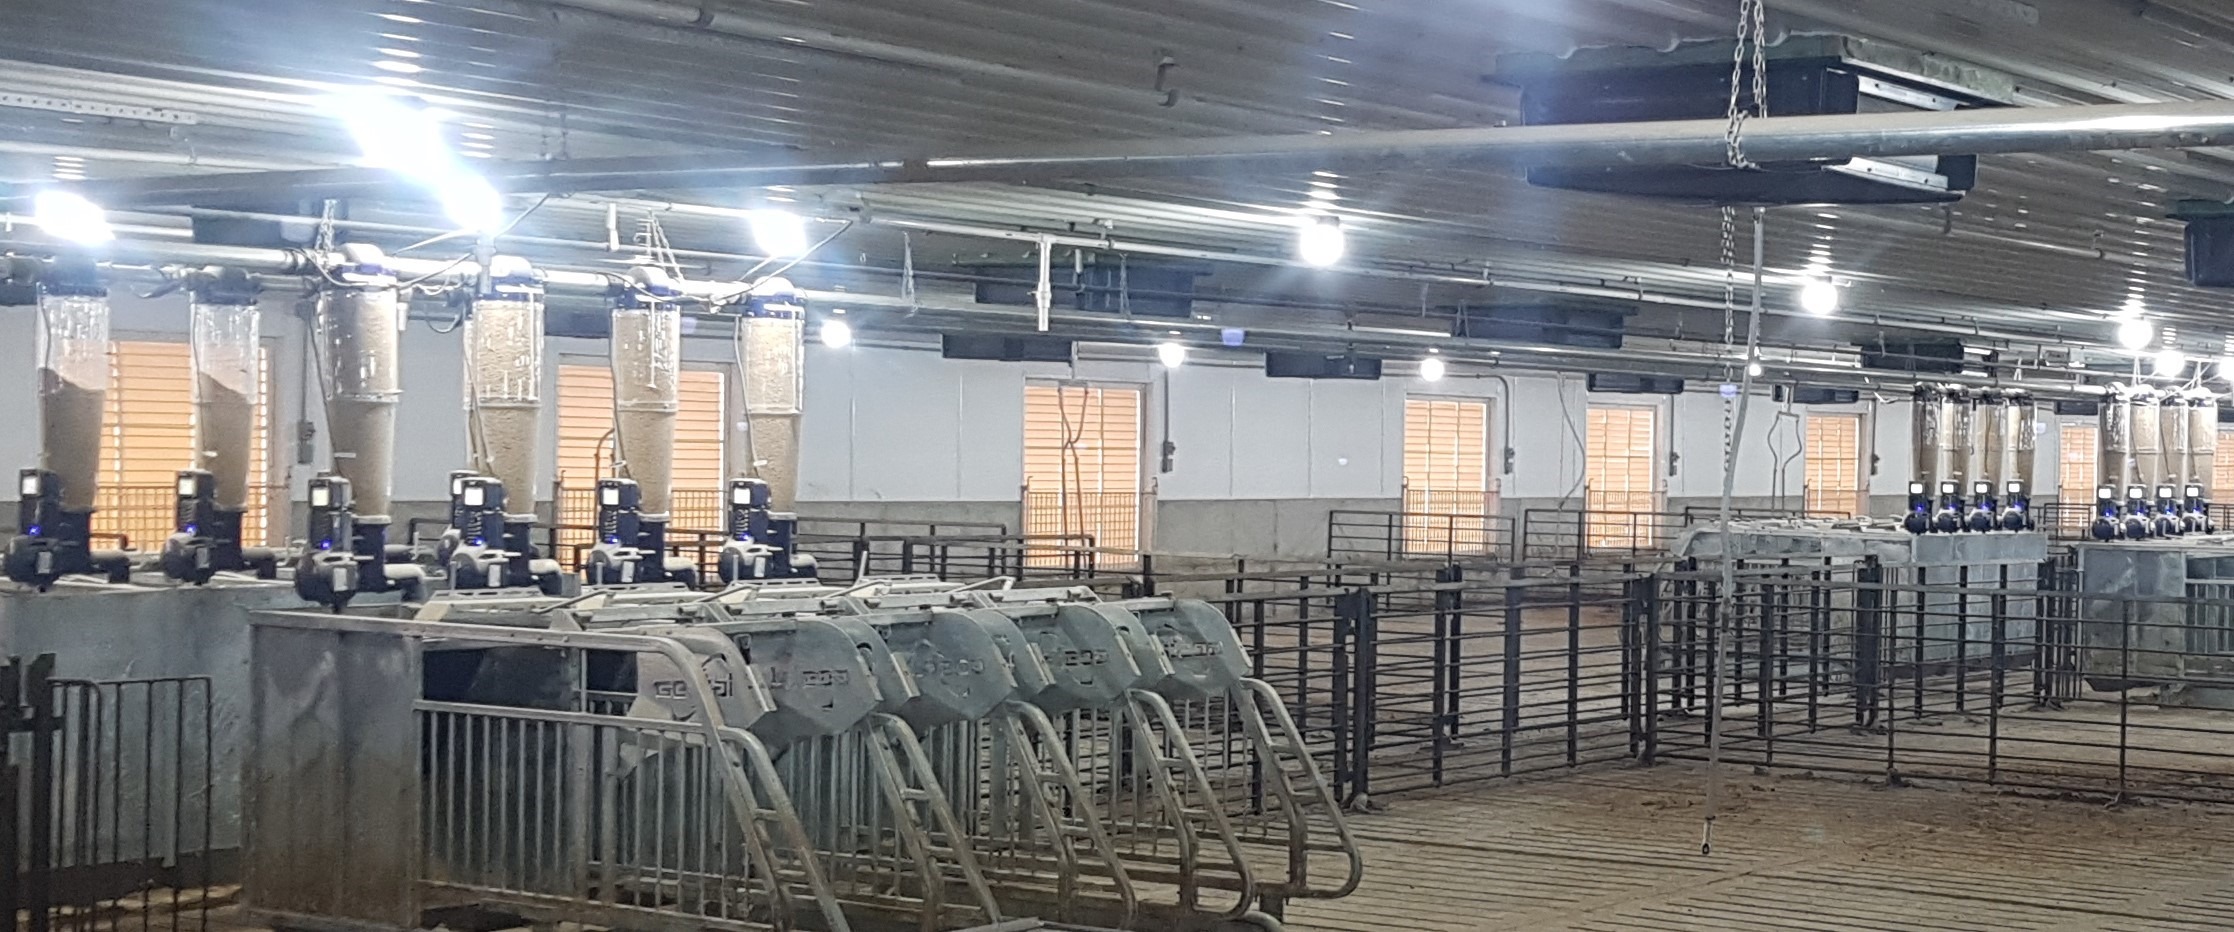 Gestal free-access stalls in gestation just after installation